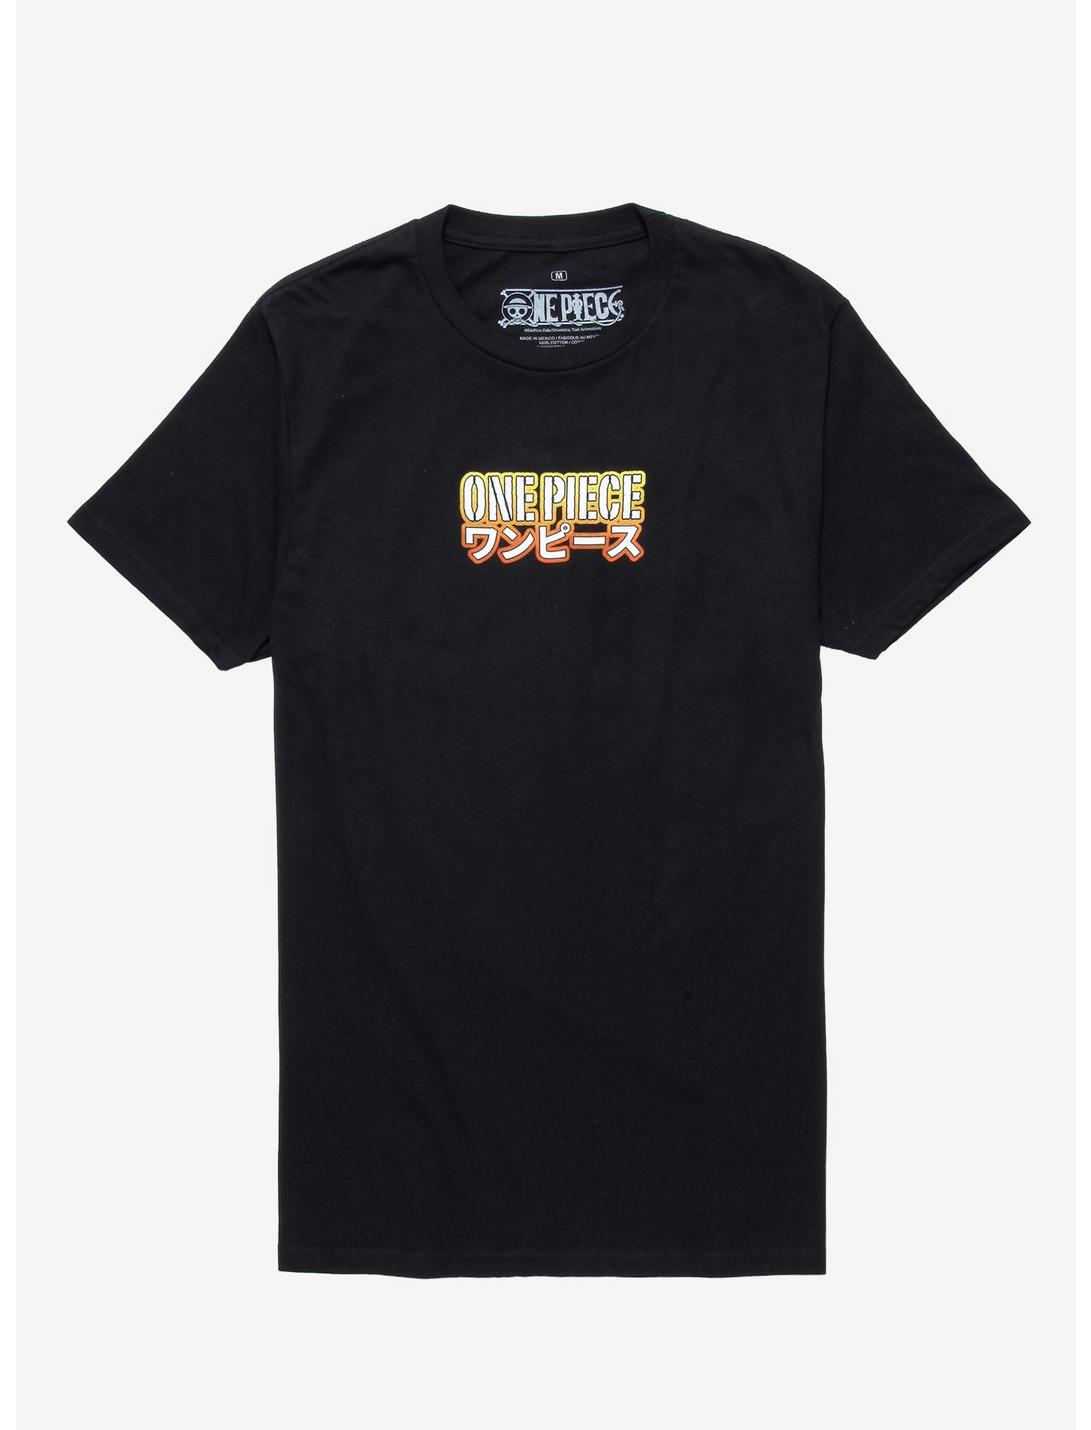 One Piece Character Back T-Shirt, BLACK, hi-res